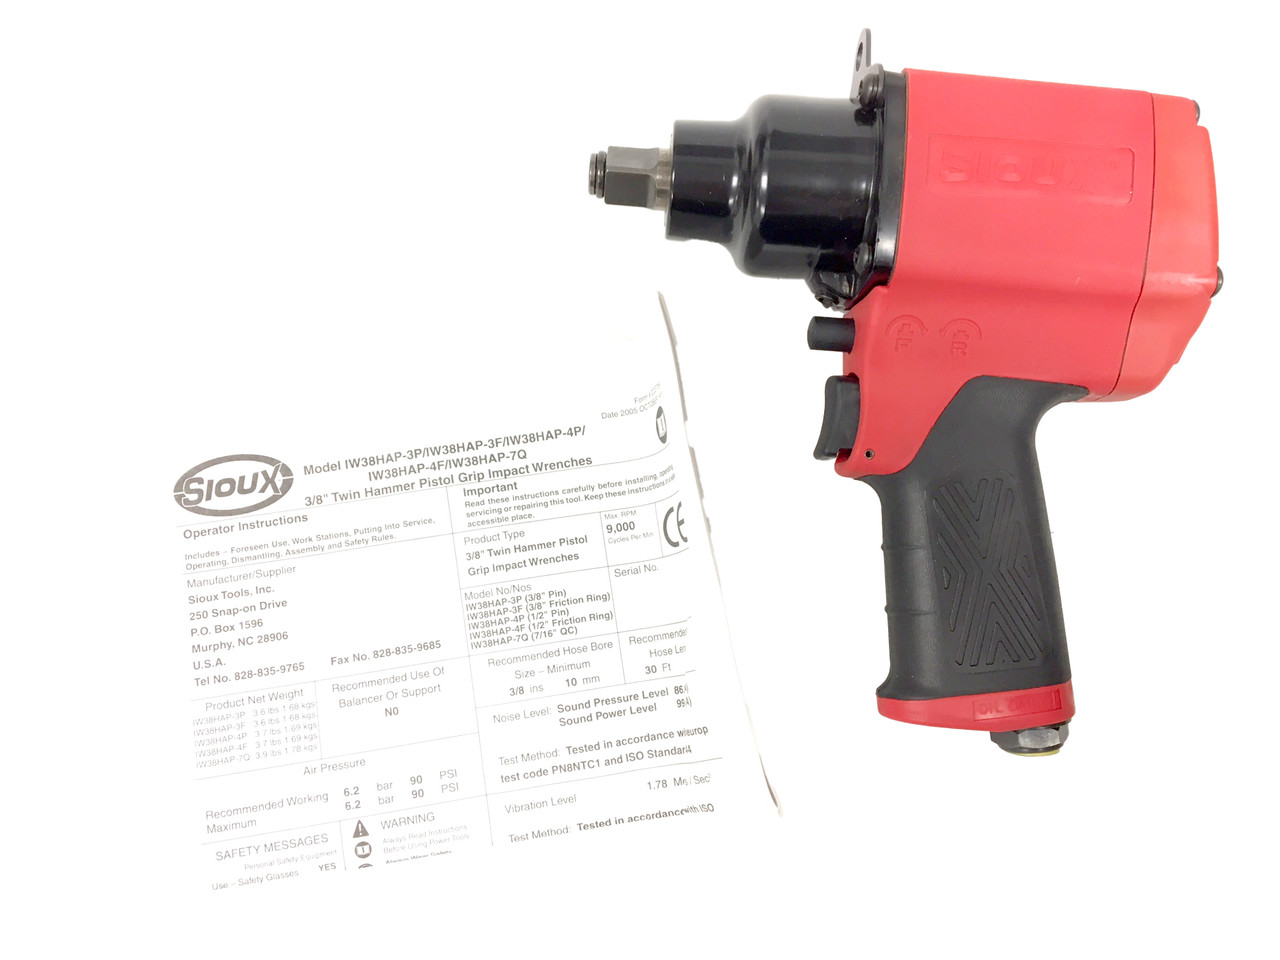 Pneumatic 1/2" Impact Wrench Sioux IW38HAP-4F